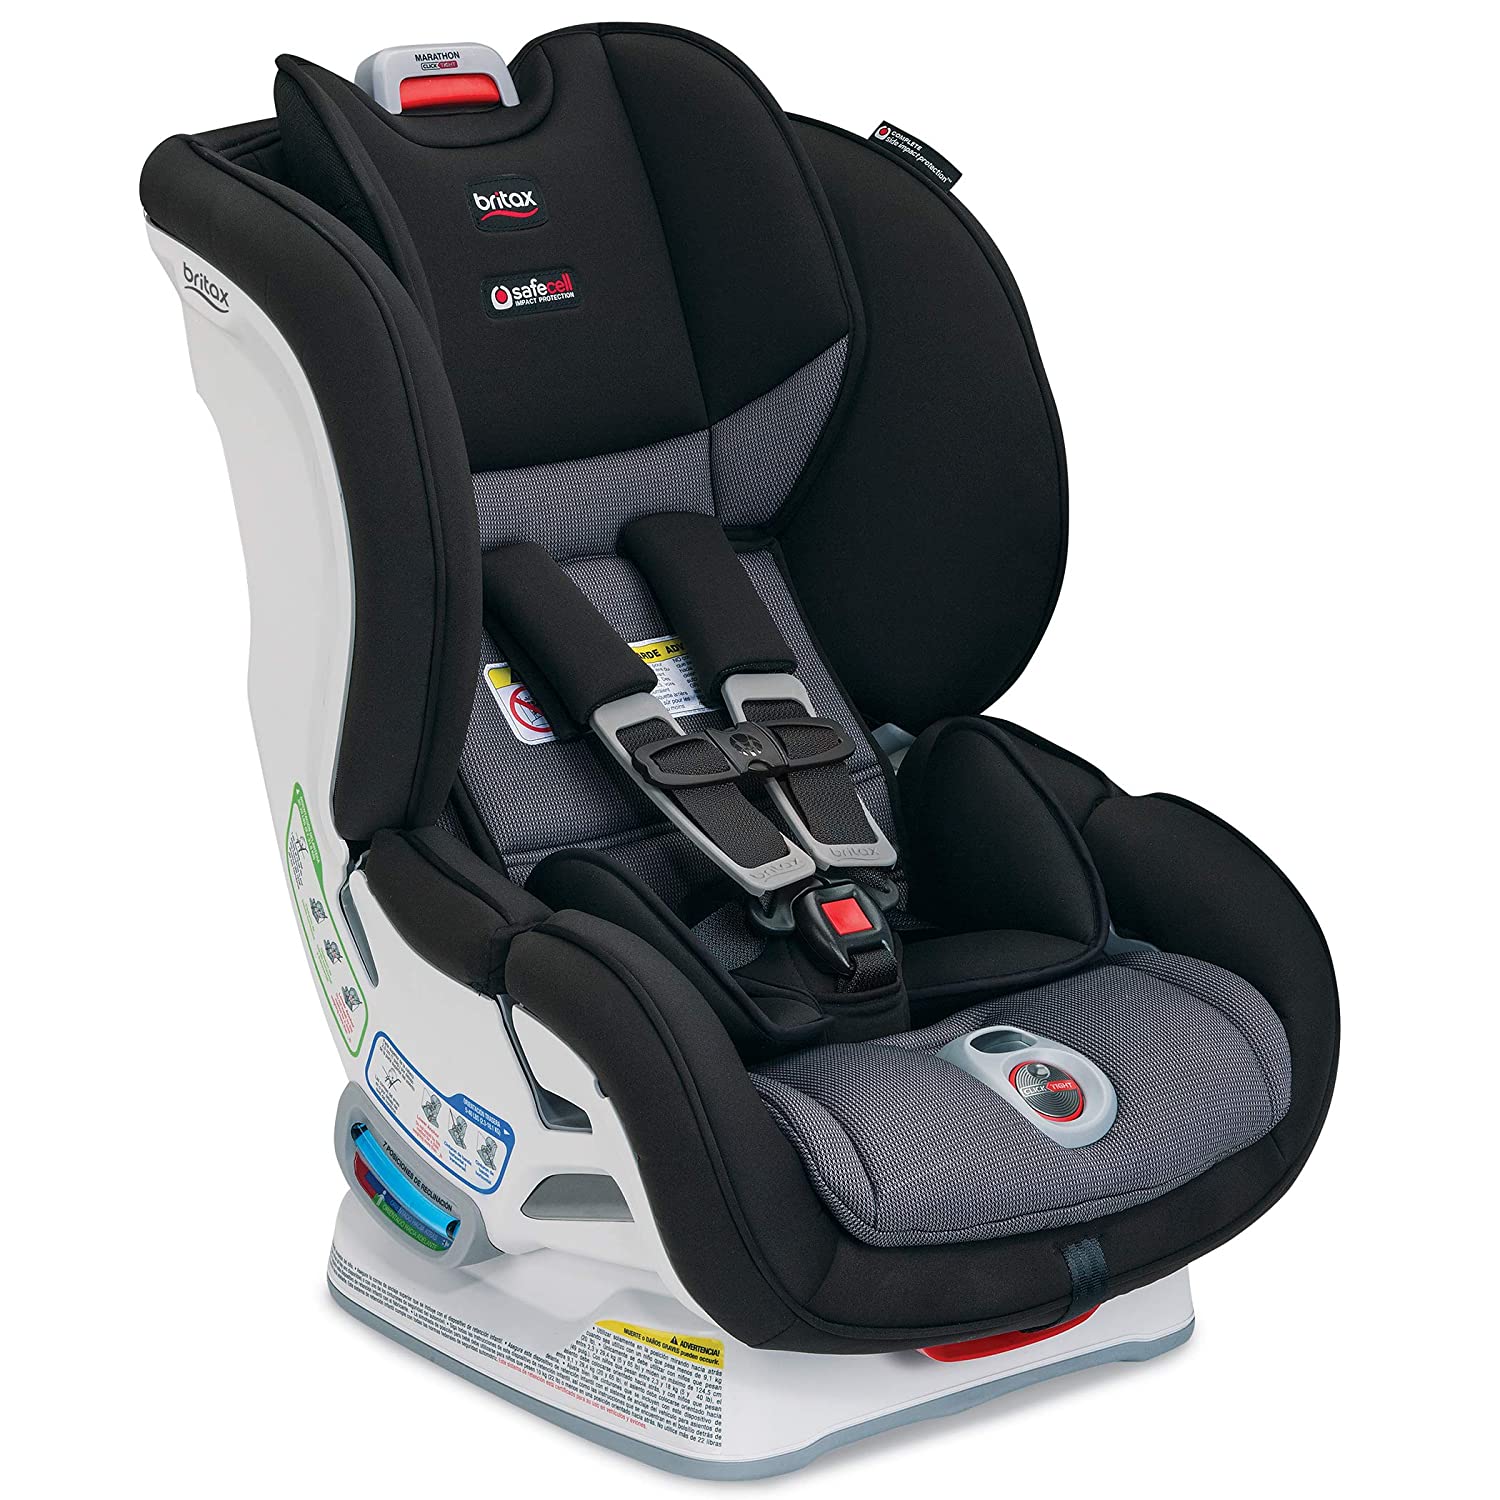 Top 5 Best Affordable Convertible Car Seats Reviews in 2023 4